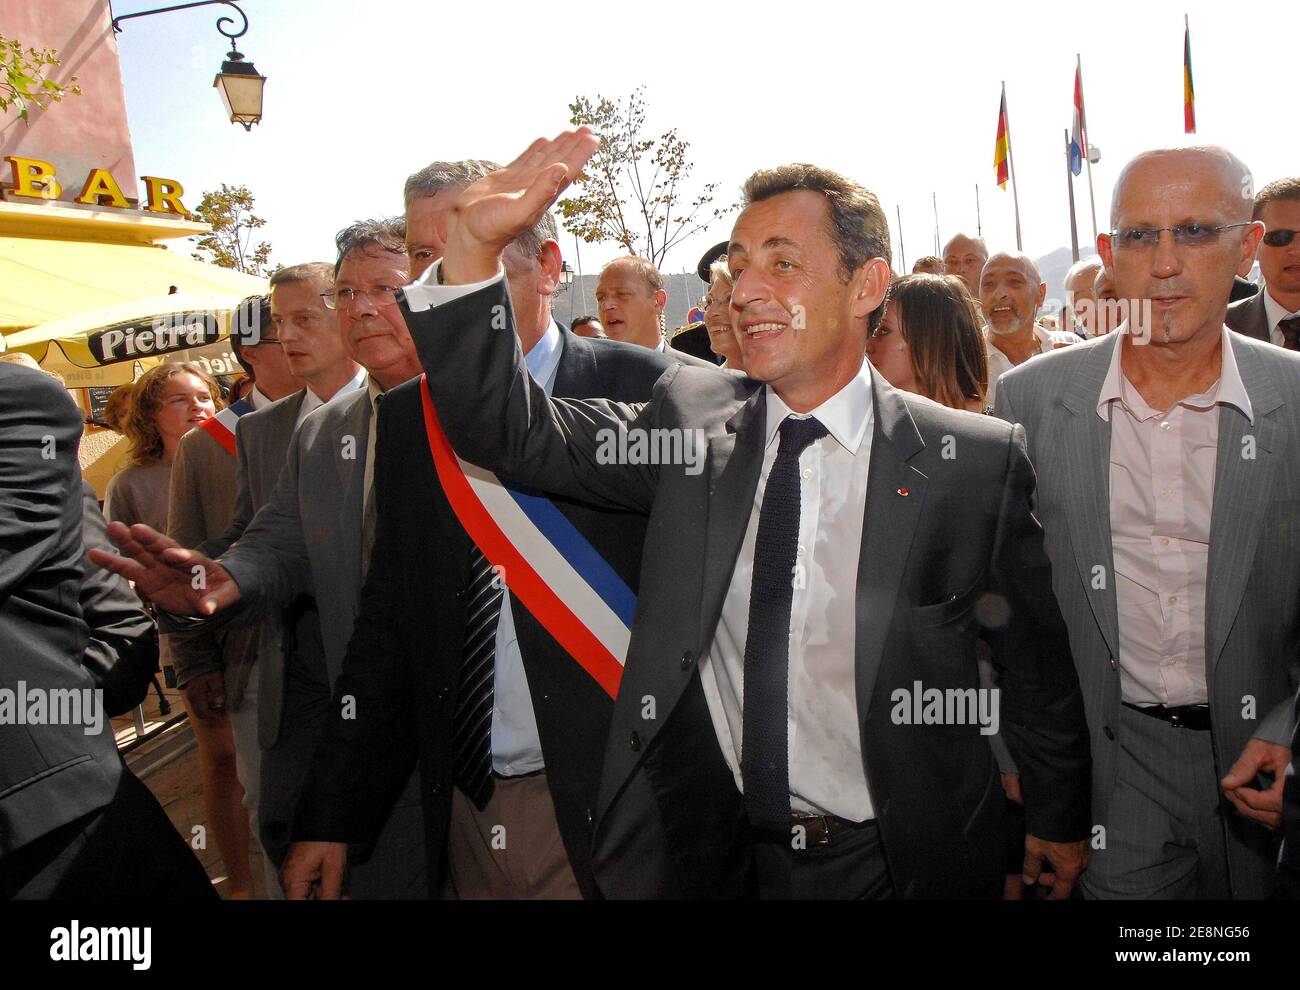 France's President Nicolas Sarkozy (L) waves to the crowd while flanked by Lucien Benvenuti (R) at Saint-Florent during a one-day visit to the French Mediterranean island of Corsica France, on August 28, 2007. Benvenuti is a local restaurant owner who claims to have received extortion threats.Photo by Christophe Guibbbaud/ABACAPRESS.COM Stock Photo